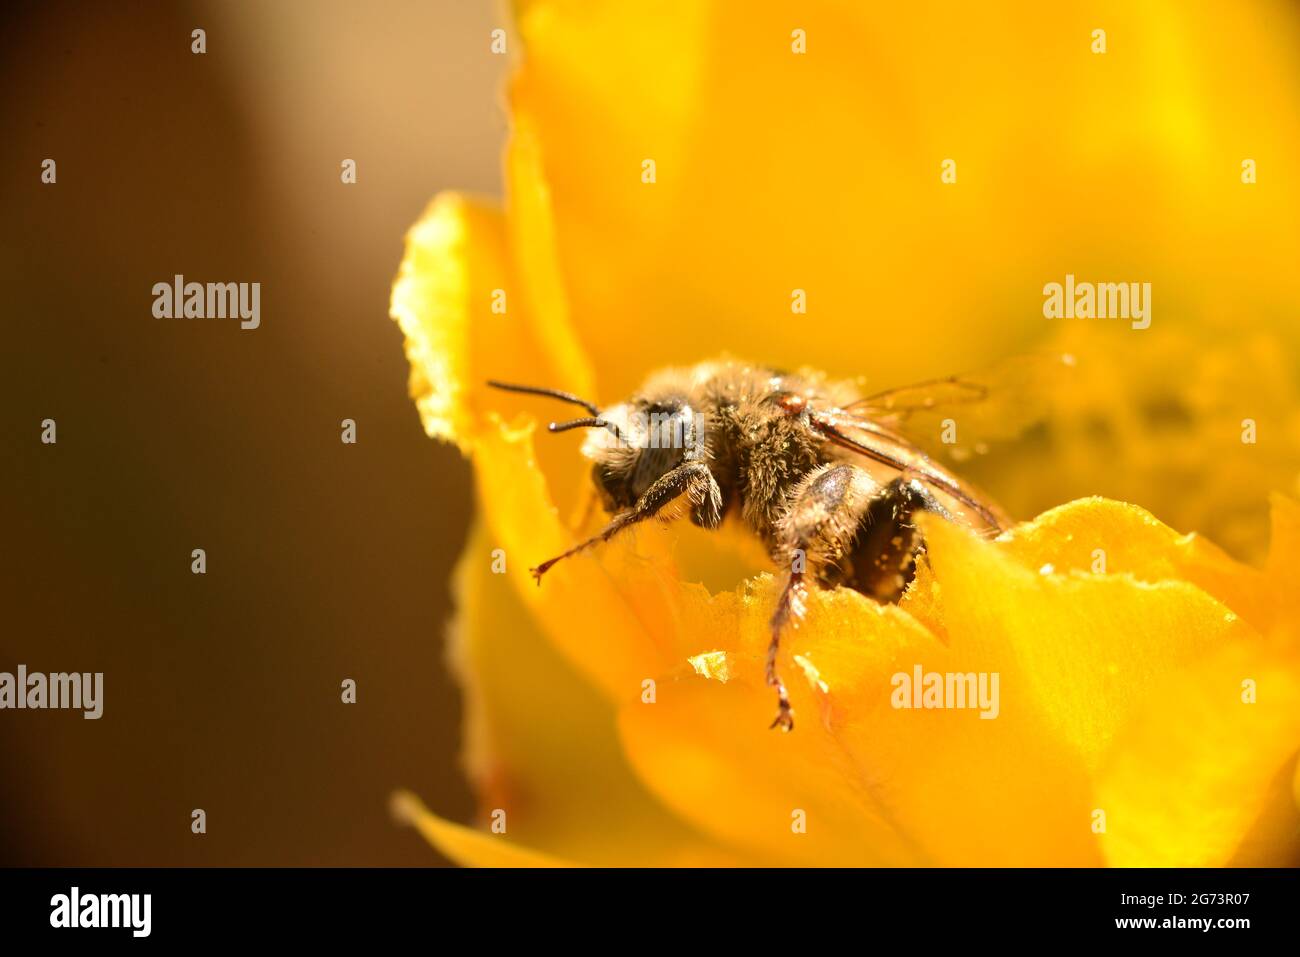 Native Bee on a Cactus Flower Stock Photo